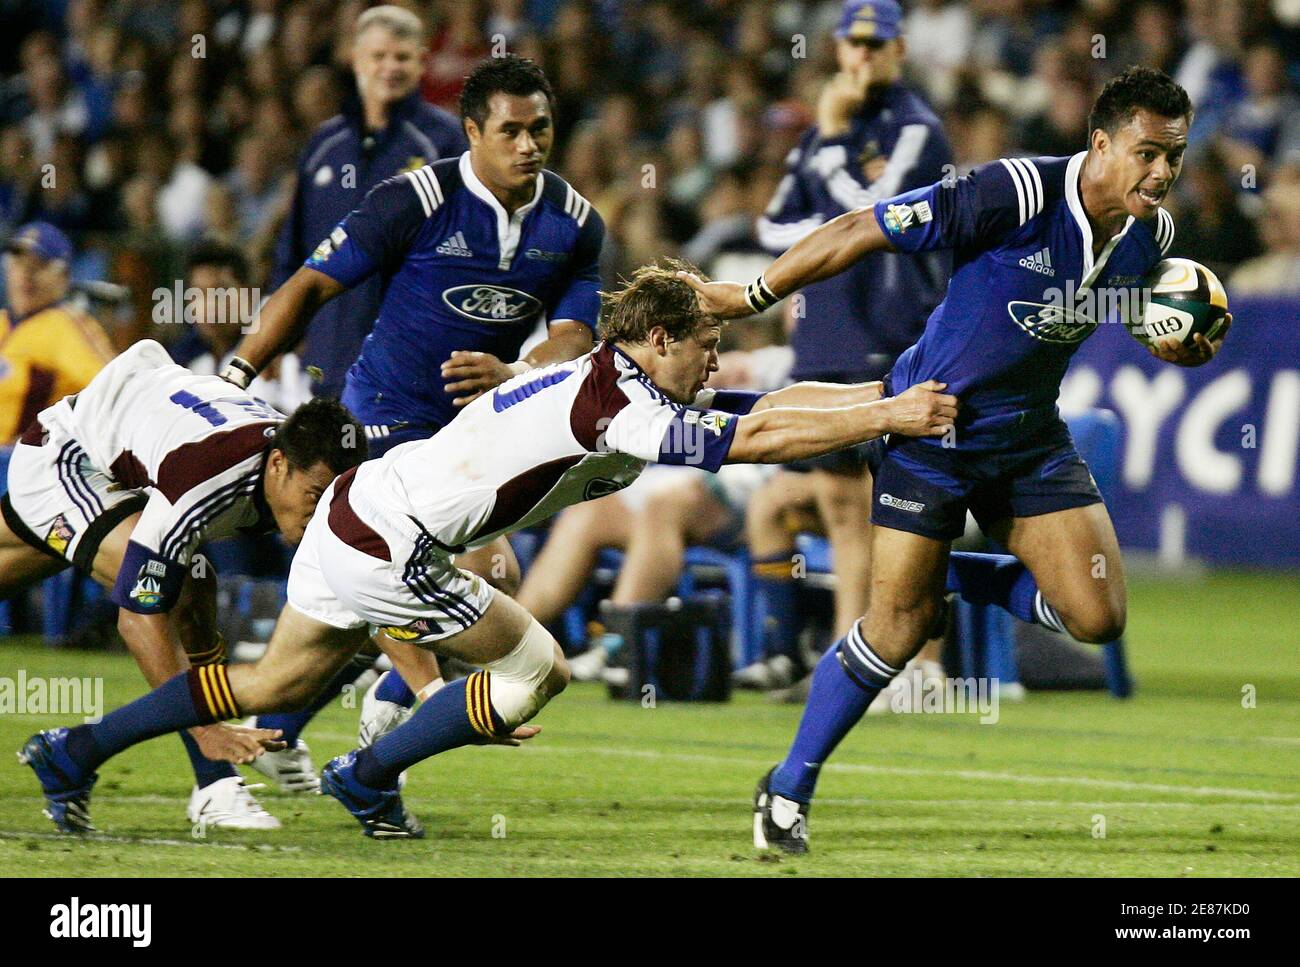 Rudi Wulf of Auckland Blues runs through the tackle of Nick Evans of Otago  Highlanders during their Super 14 rugby union match at Eden Park in  Auckland March 2, 2007. REUTERS/Nigel Marple (